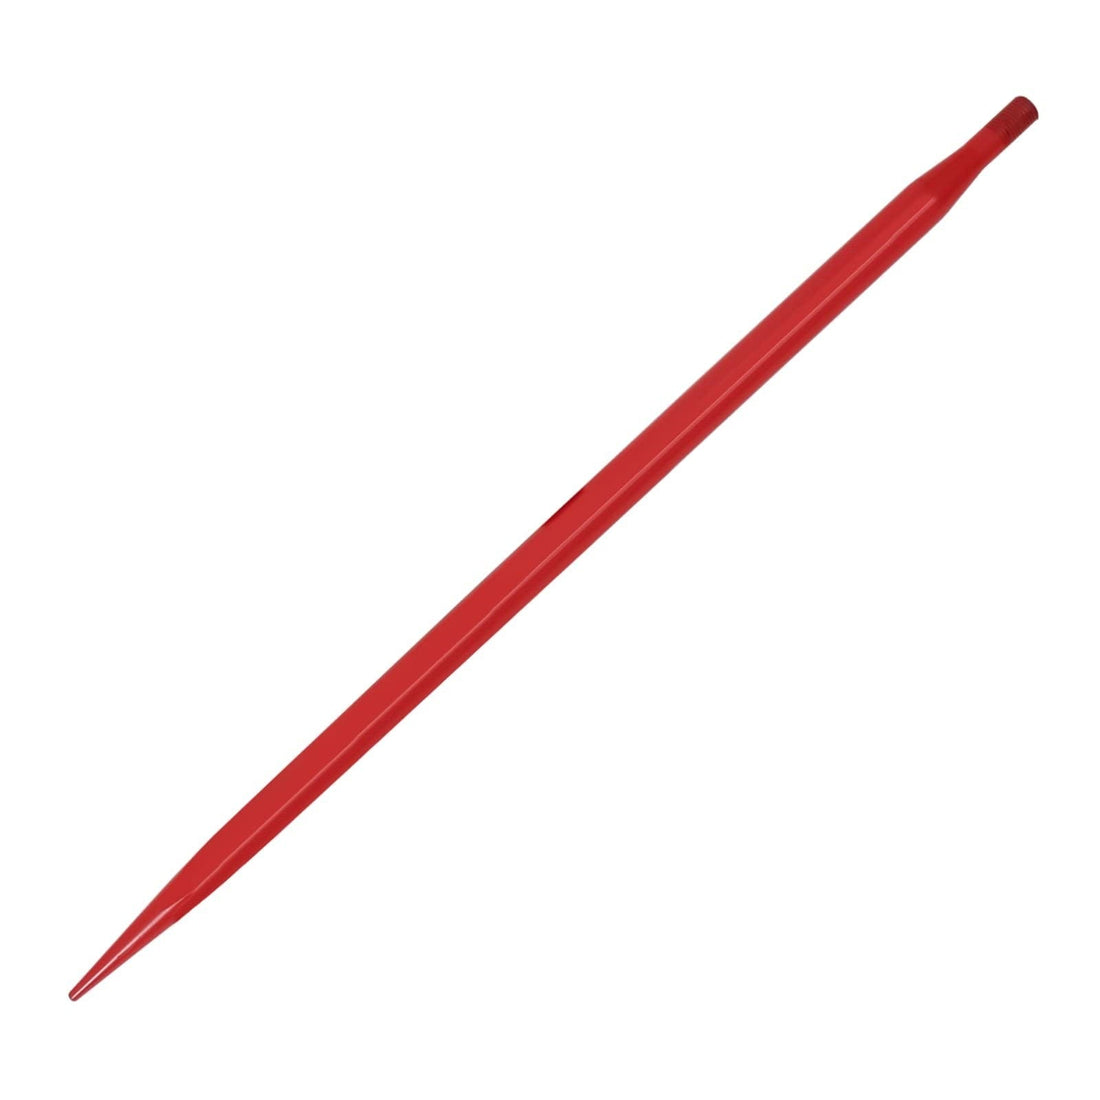 49 Inch Bale Spear 3000 lbs Capacity Hay Red Coated Bale Forks for Bobcat Tractors